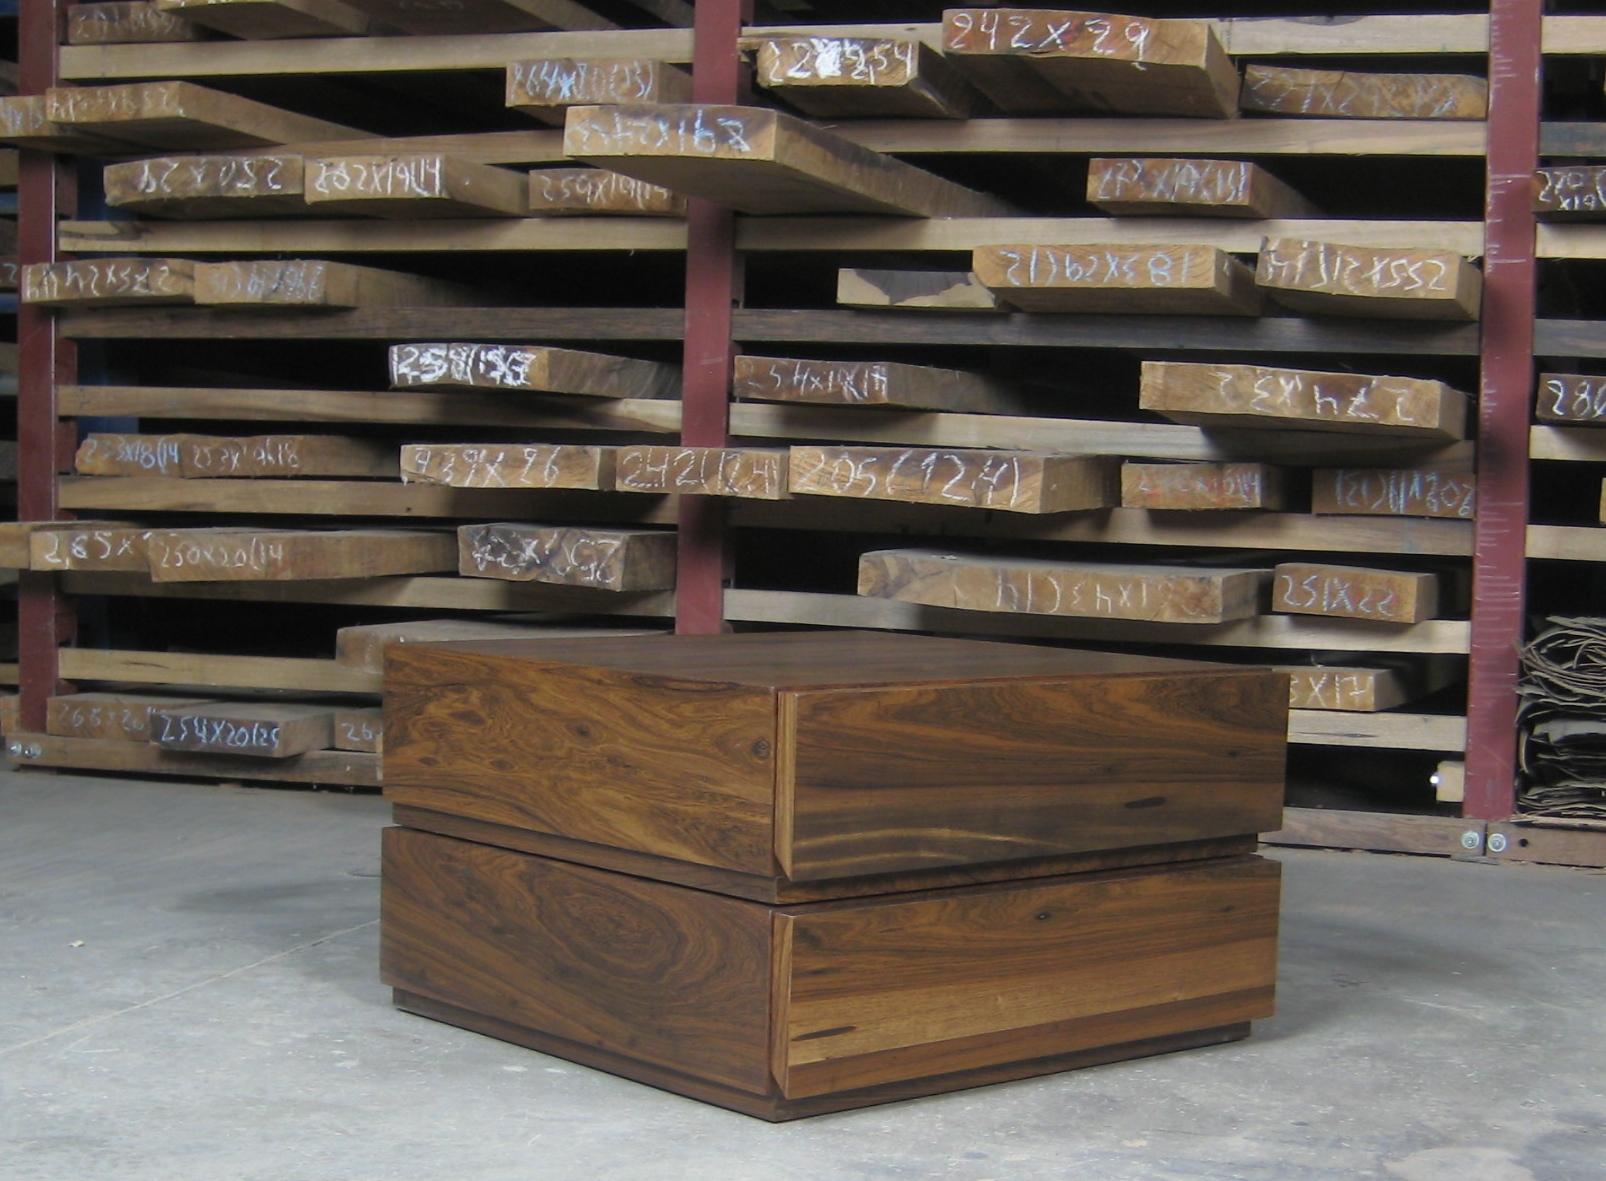 Each one of these units is identical in shape but highlights the natural variations of the Argentine Rosewood from which they are made. Combine them to make a functional storage unit in the form of a pedestal, stairs, dresser, or nightstand.